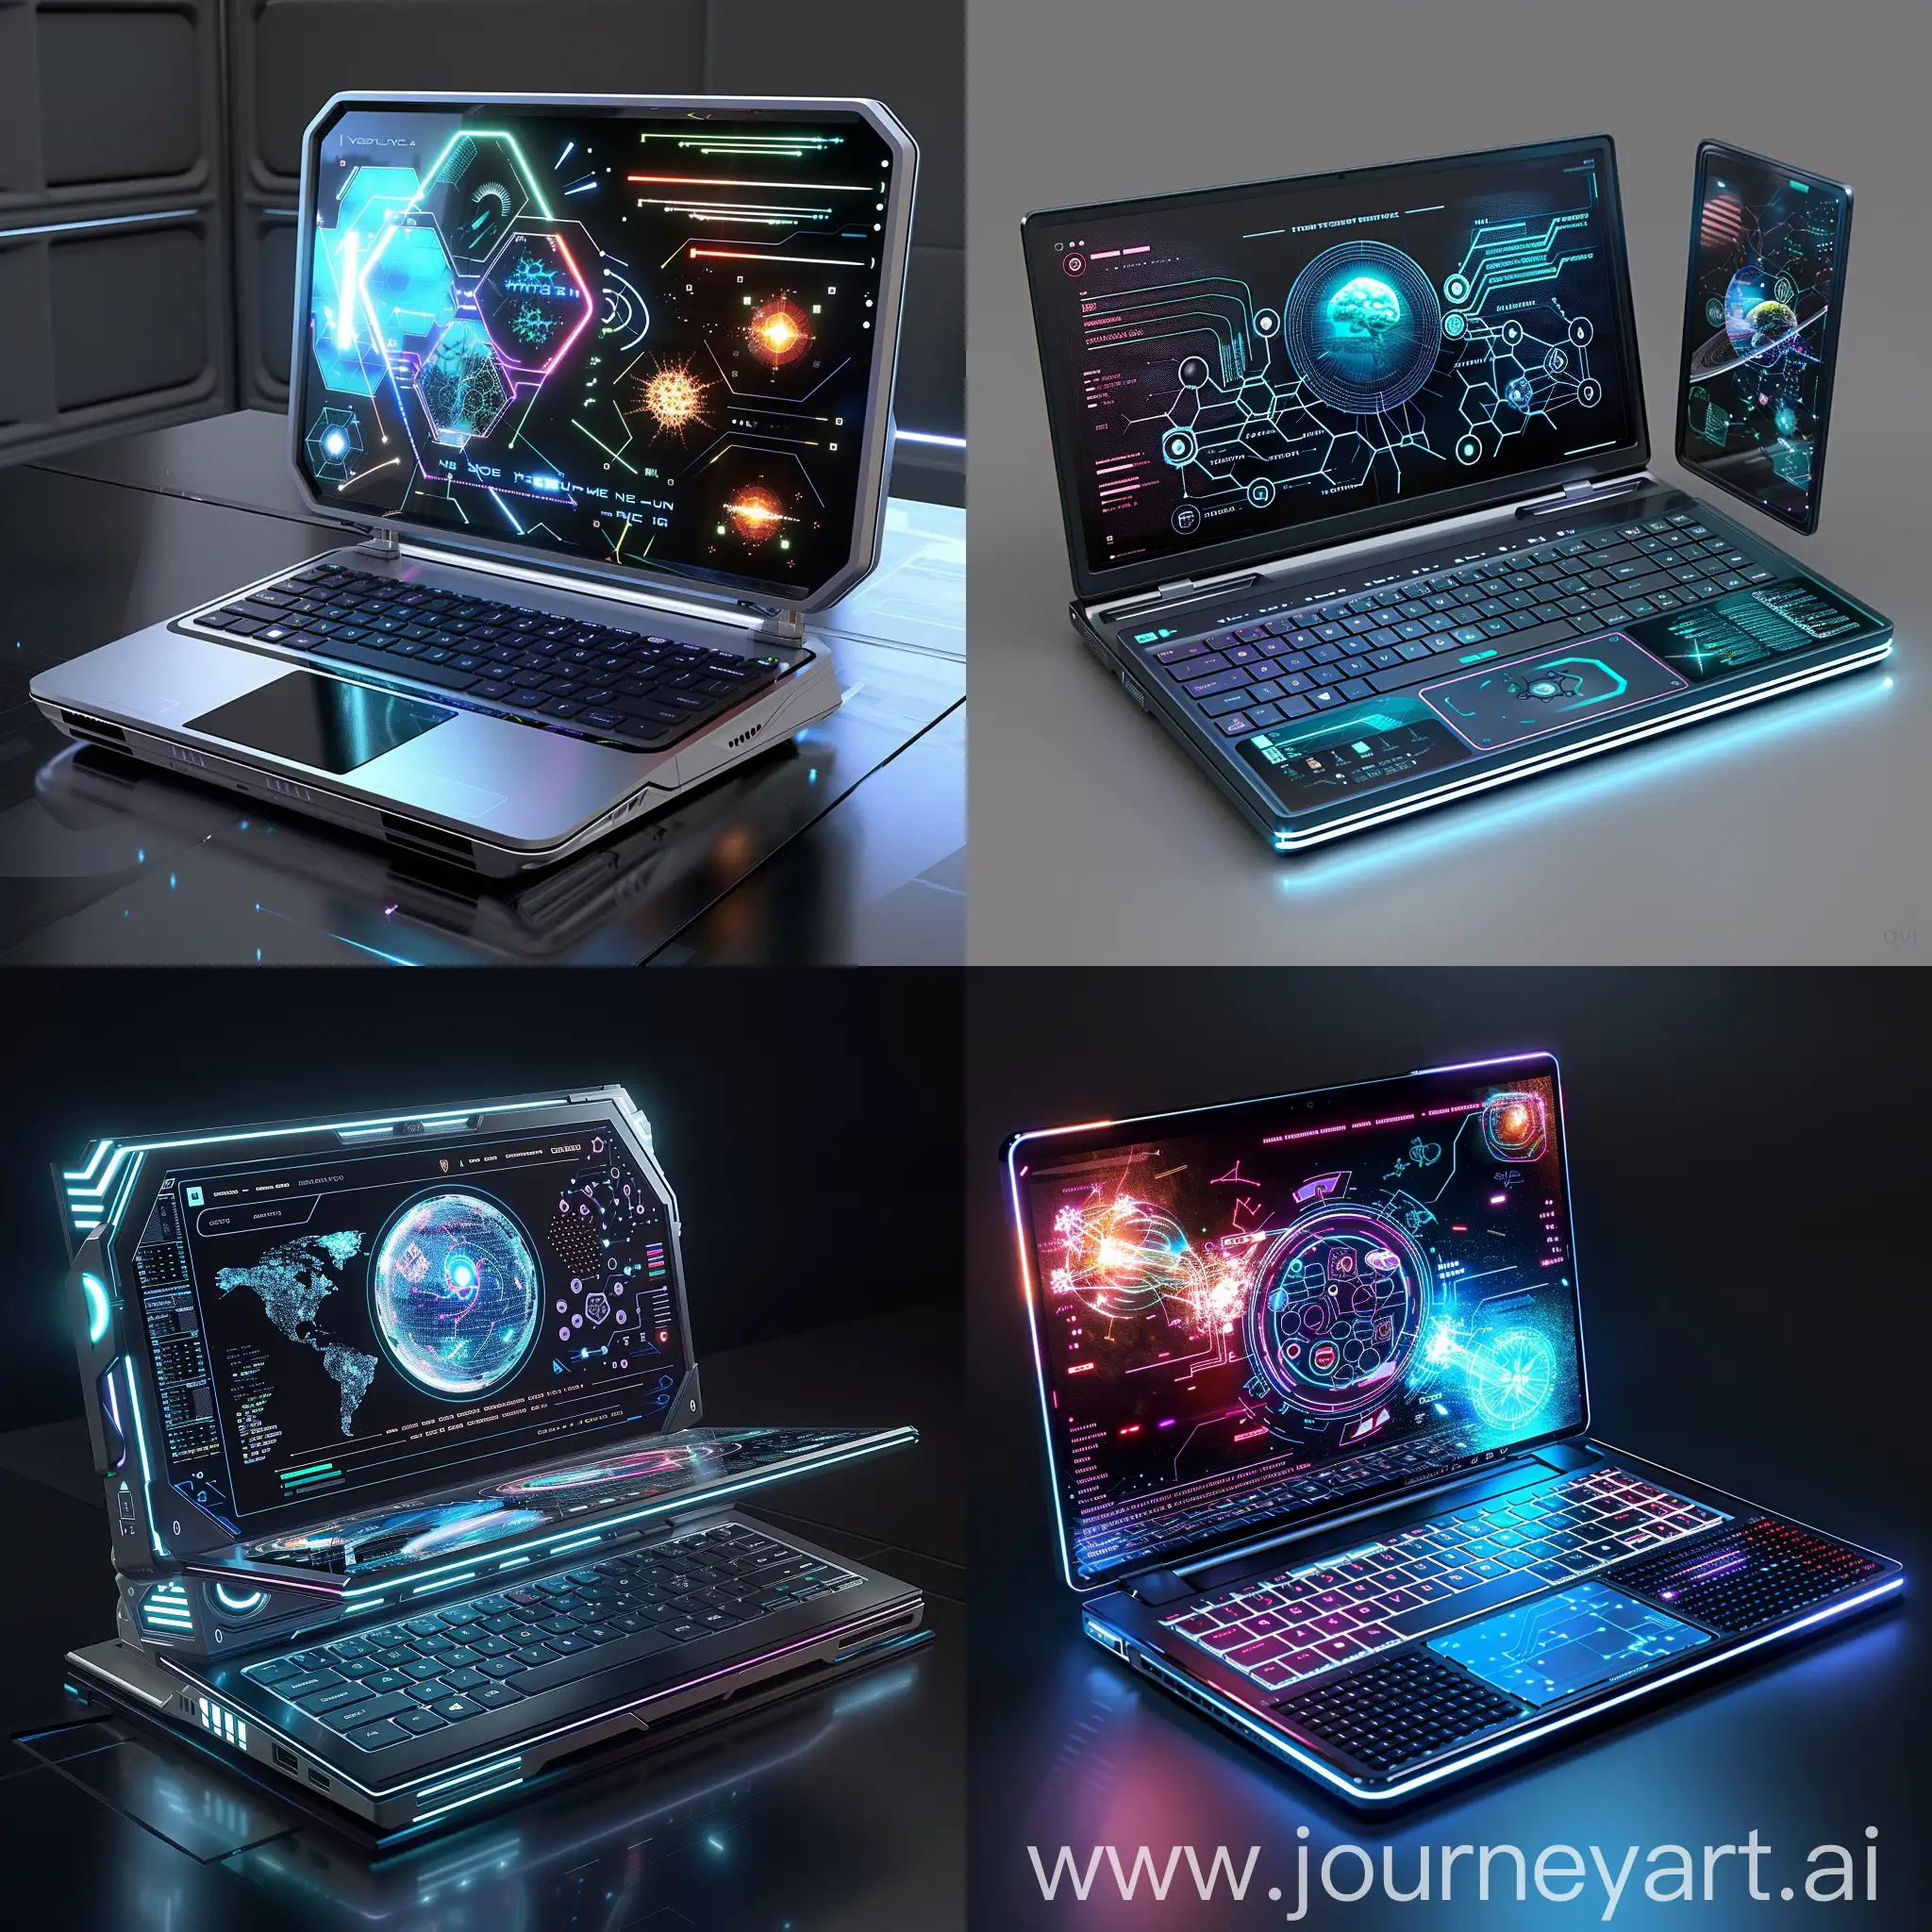 Futuristic-Quantum-Laptop-with-Holographic-Displays-and-SelfHealing-Materials